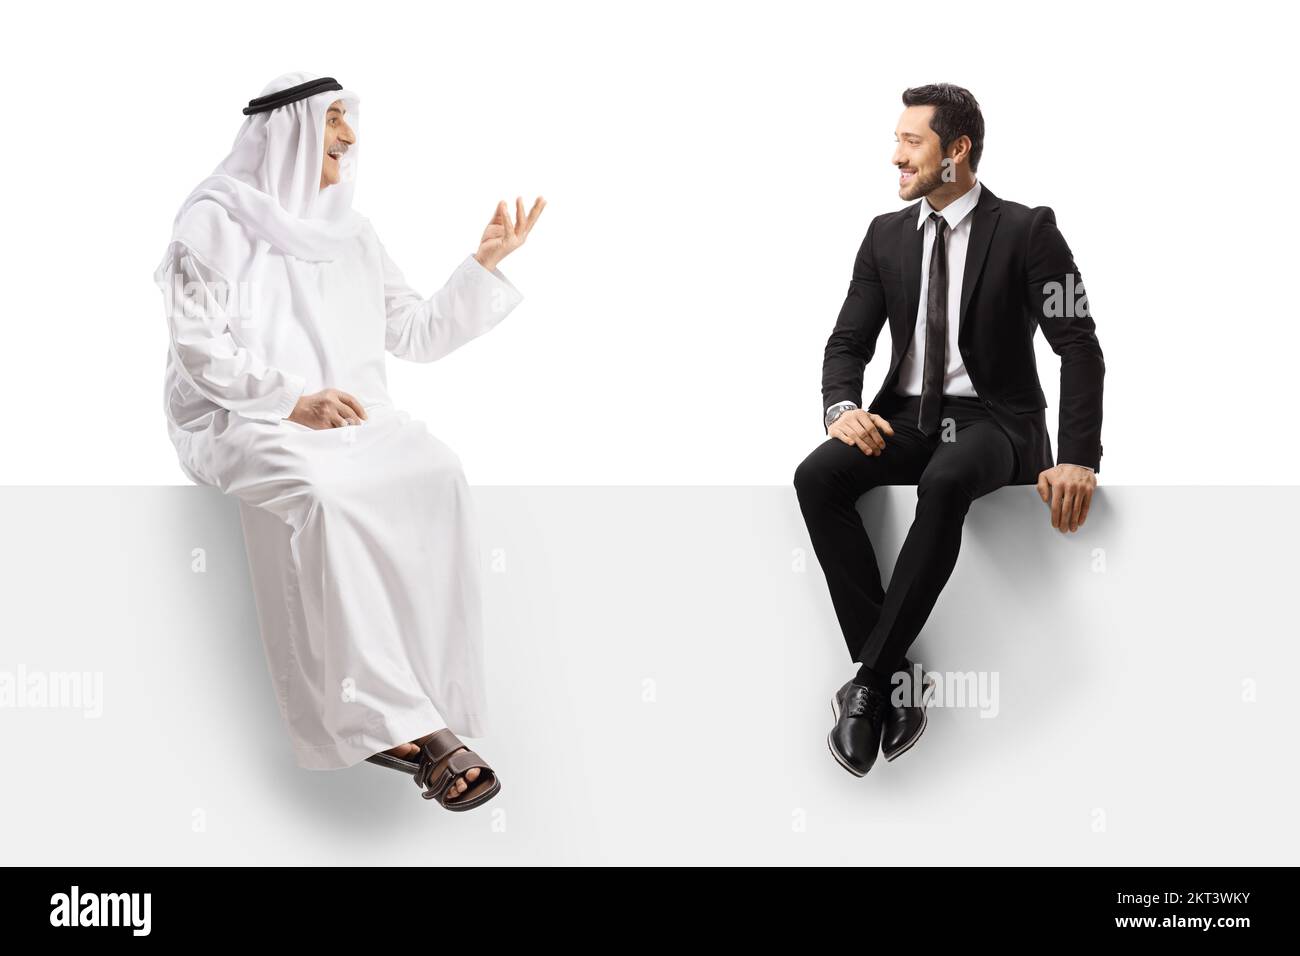 Arab man in ethnic clothes talking to a businessman seated on a blank white panel isolated on white background Stock Photo